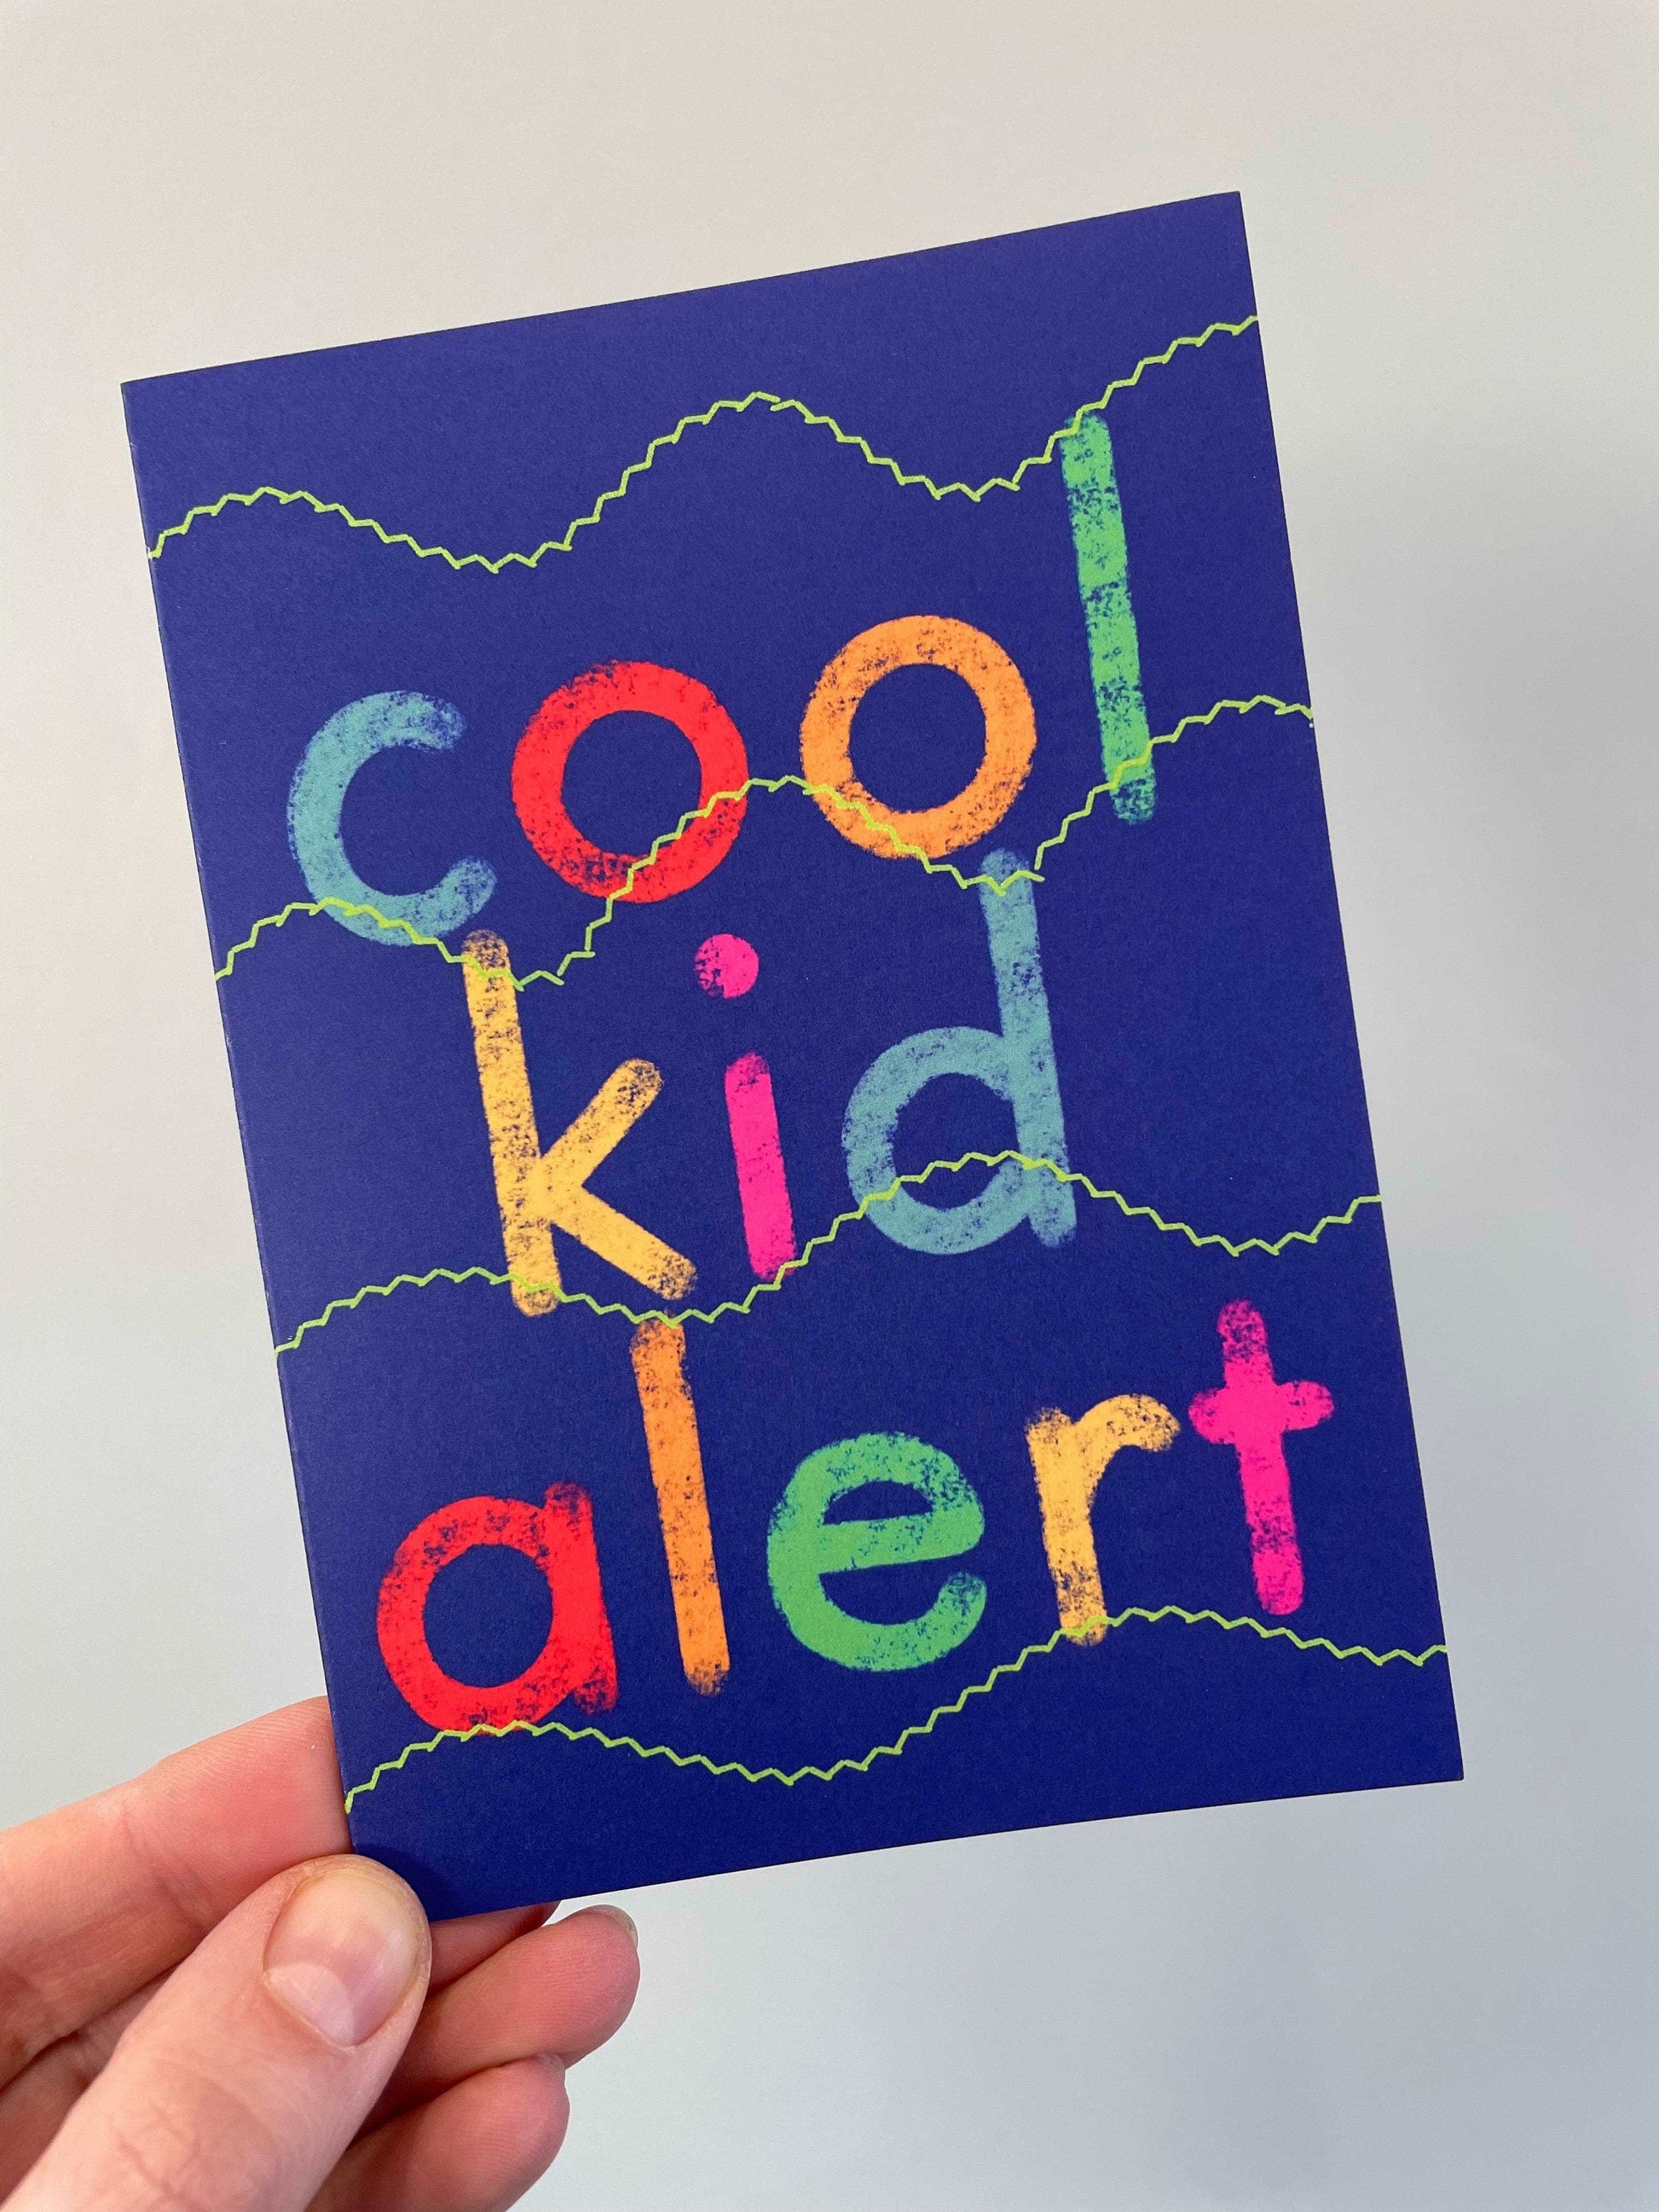 Cool Kid Alert bright card And Hope Designs Cards